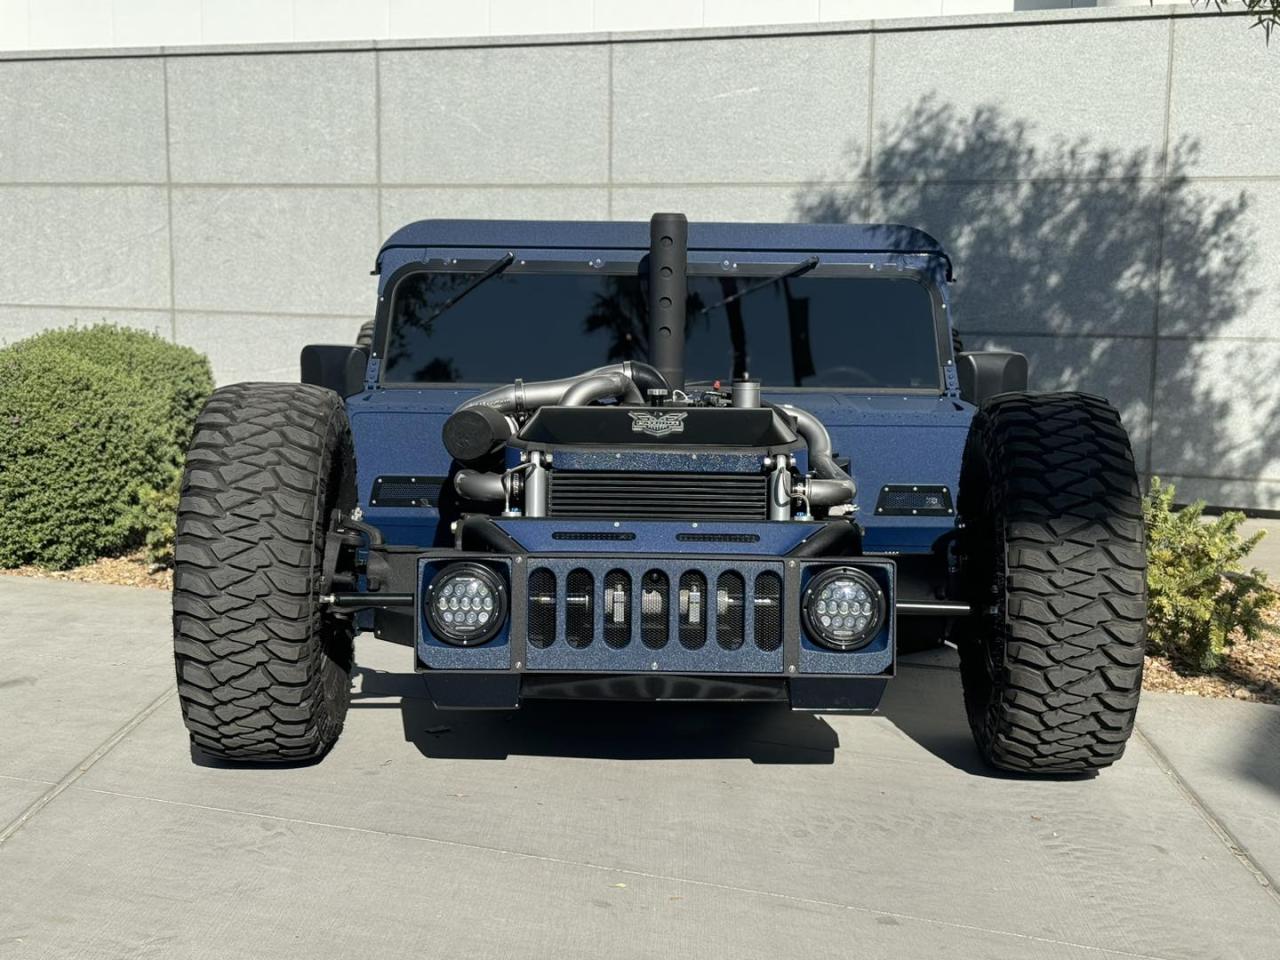 lamtac up close with the beast hummer h fitted with f engine and wide body transforming into a handsome monster at the sema show 655c8db14704b Up Close With The Beast: Hummer H1 Fitted With F1 Engine And Wide Body, Transforming Into A Handsome Monster At The SEMA Show